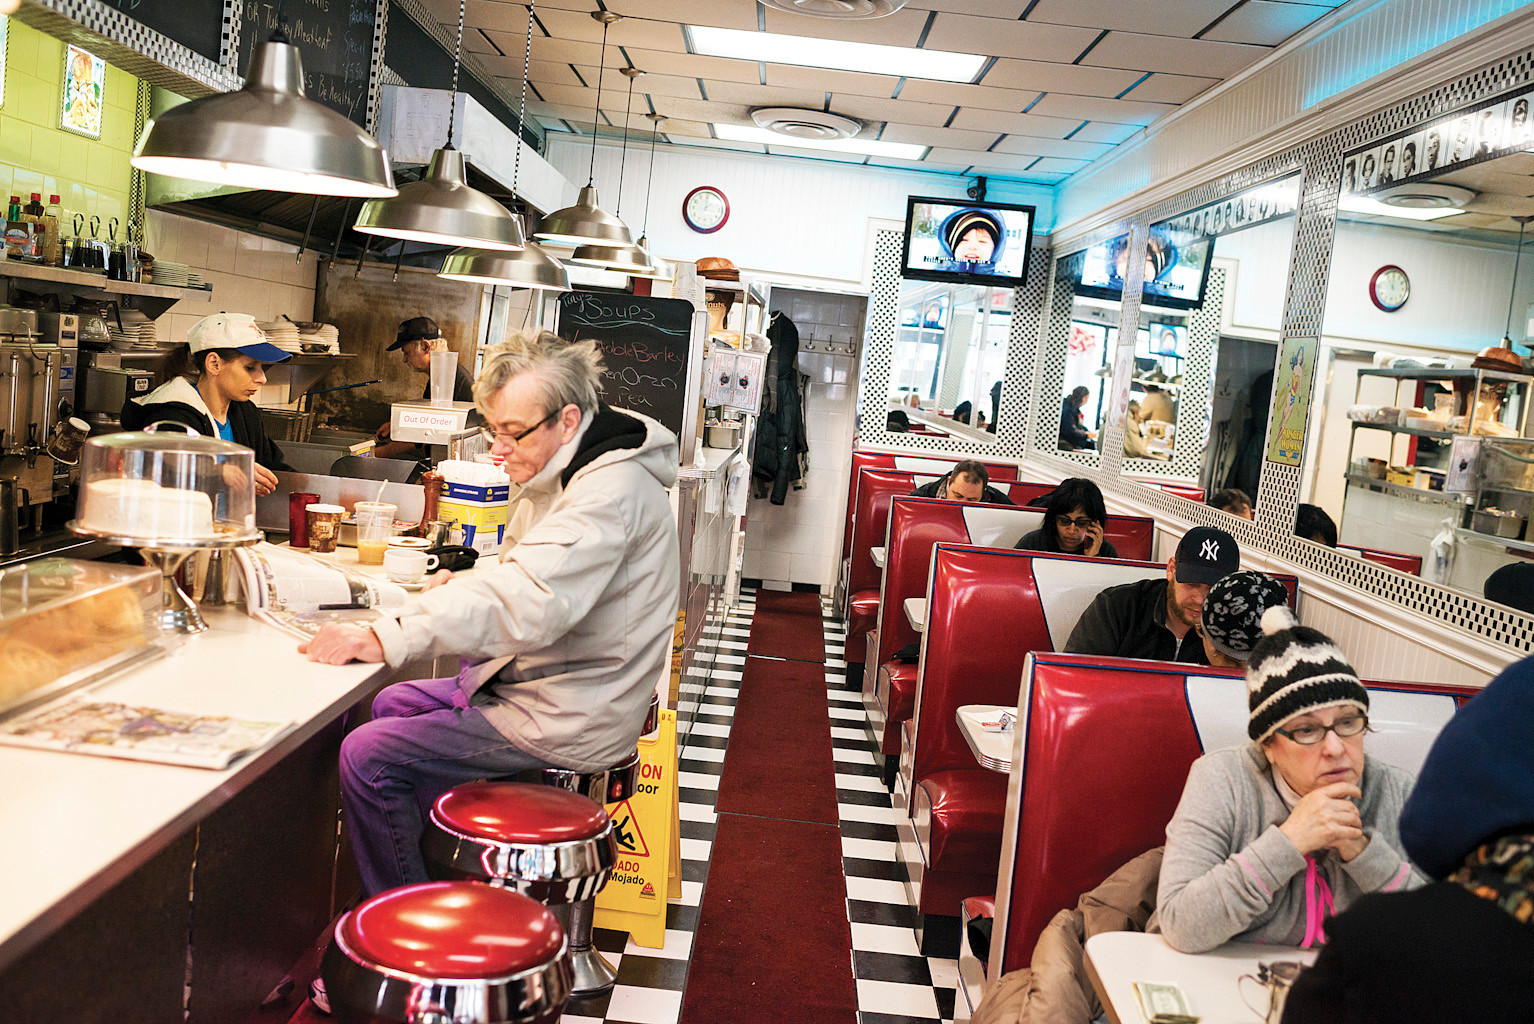 The breakfast scene at Tiny's Diner in Riverdale on Monday morning.